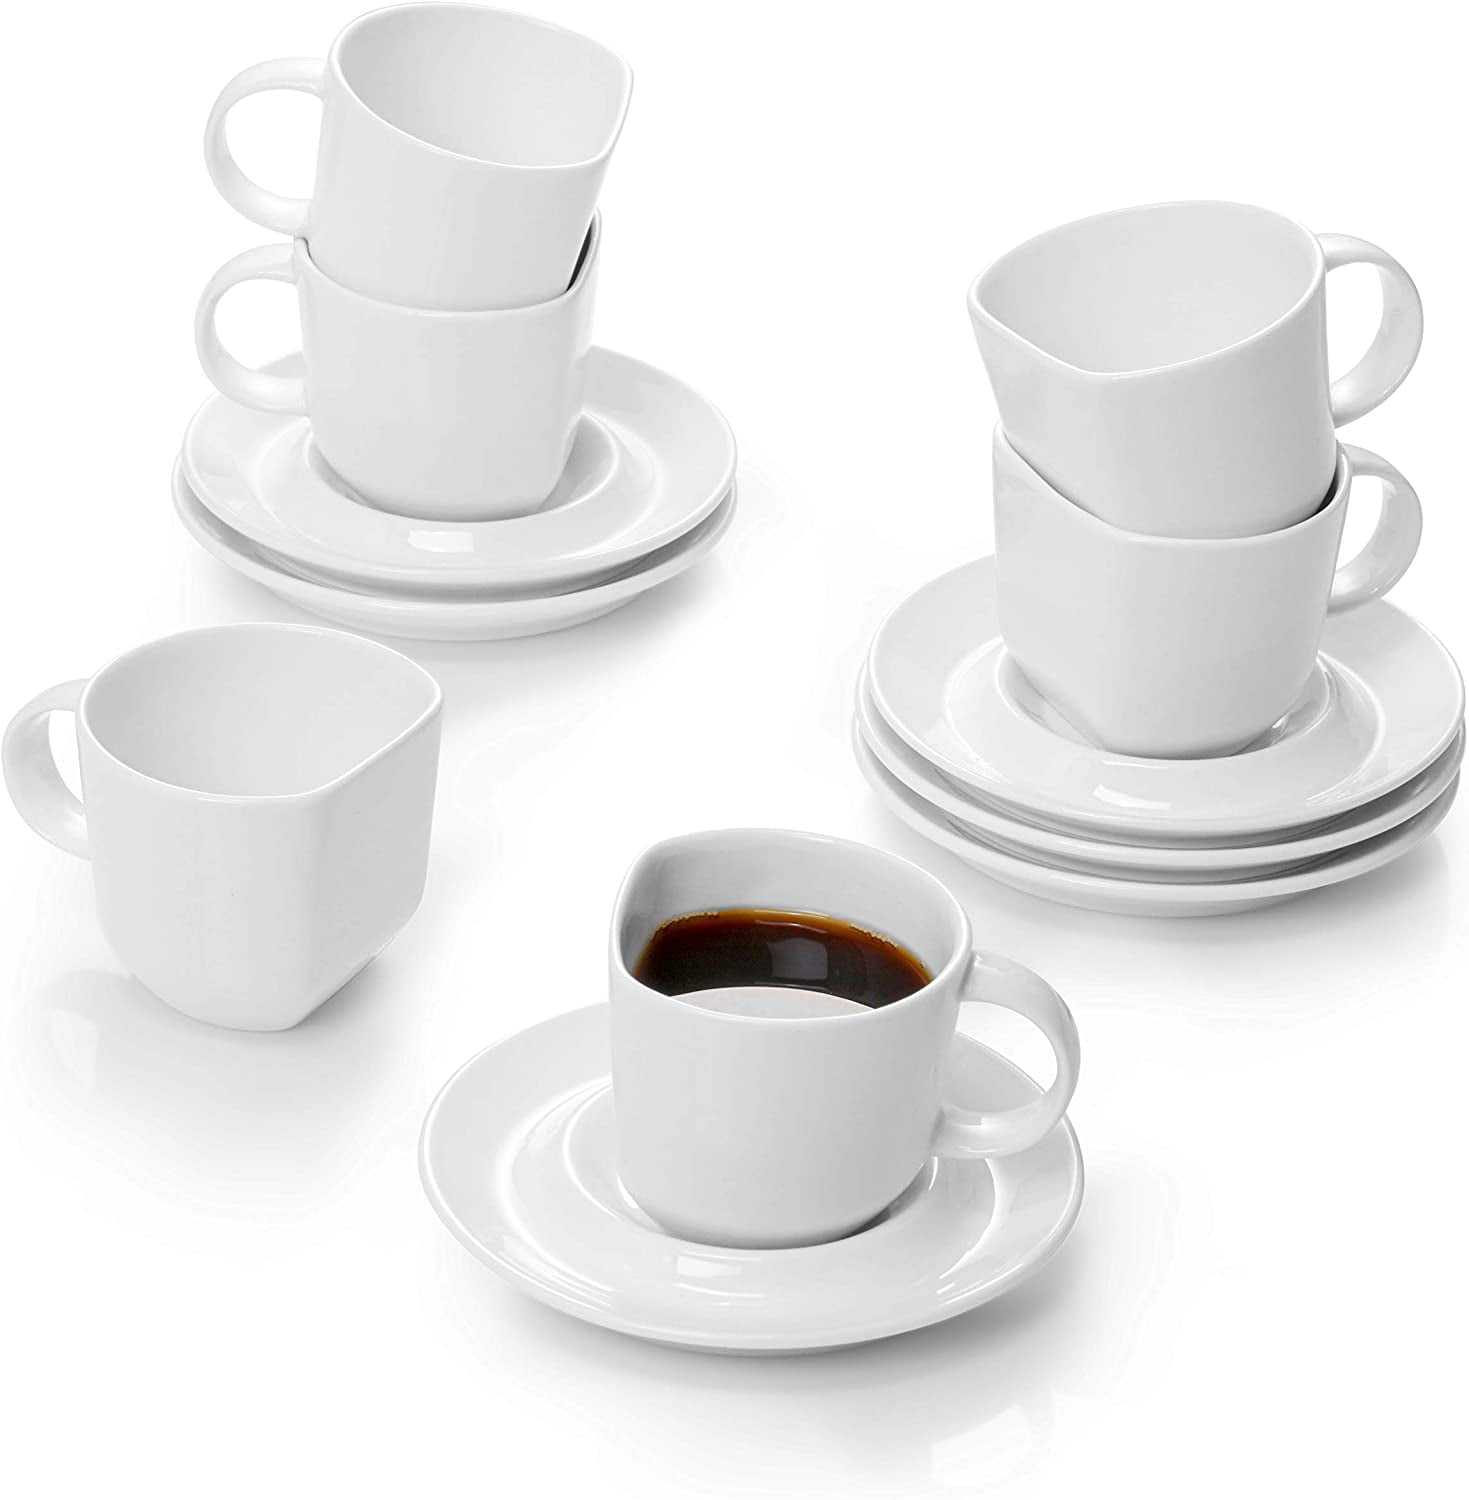 Luxury Espresso Coffee Set 6 Cups 6 Saucers 2,5 oz White Porcelain in Gift Box